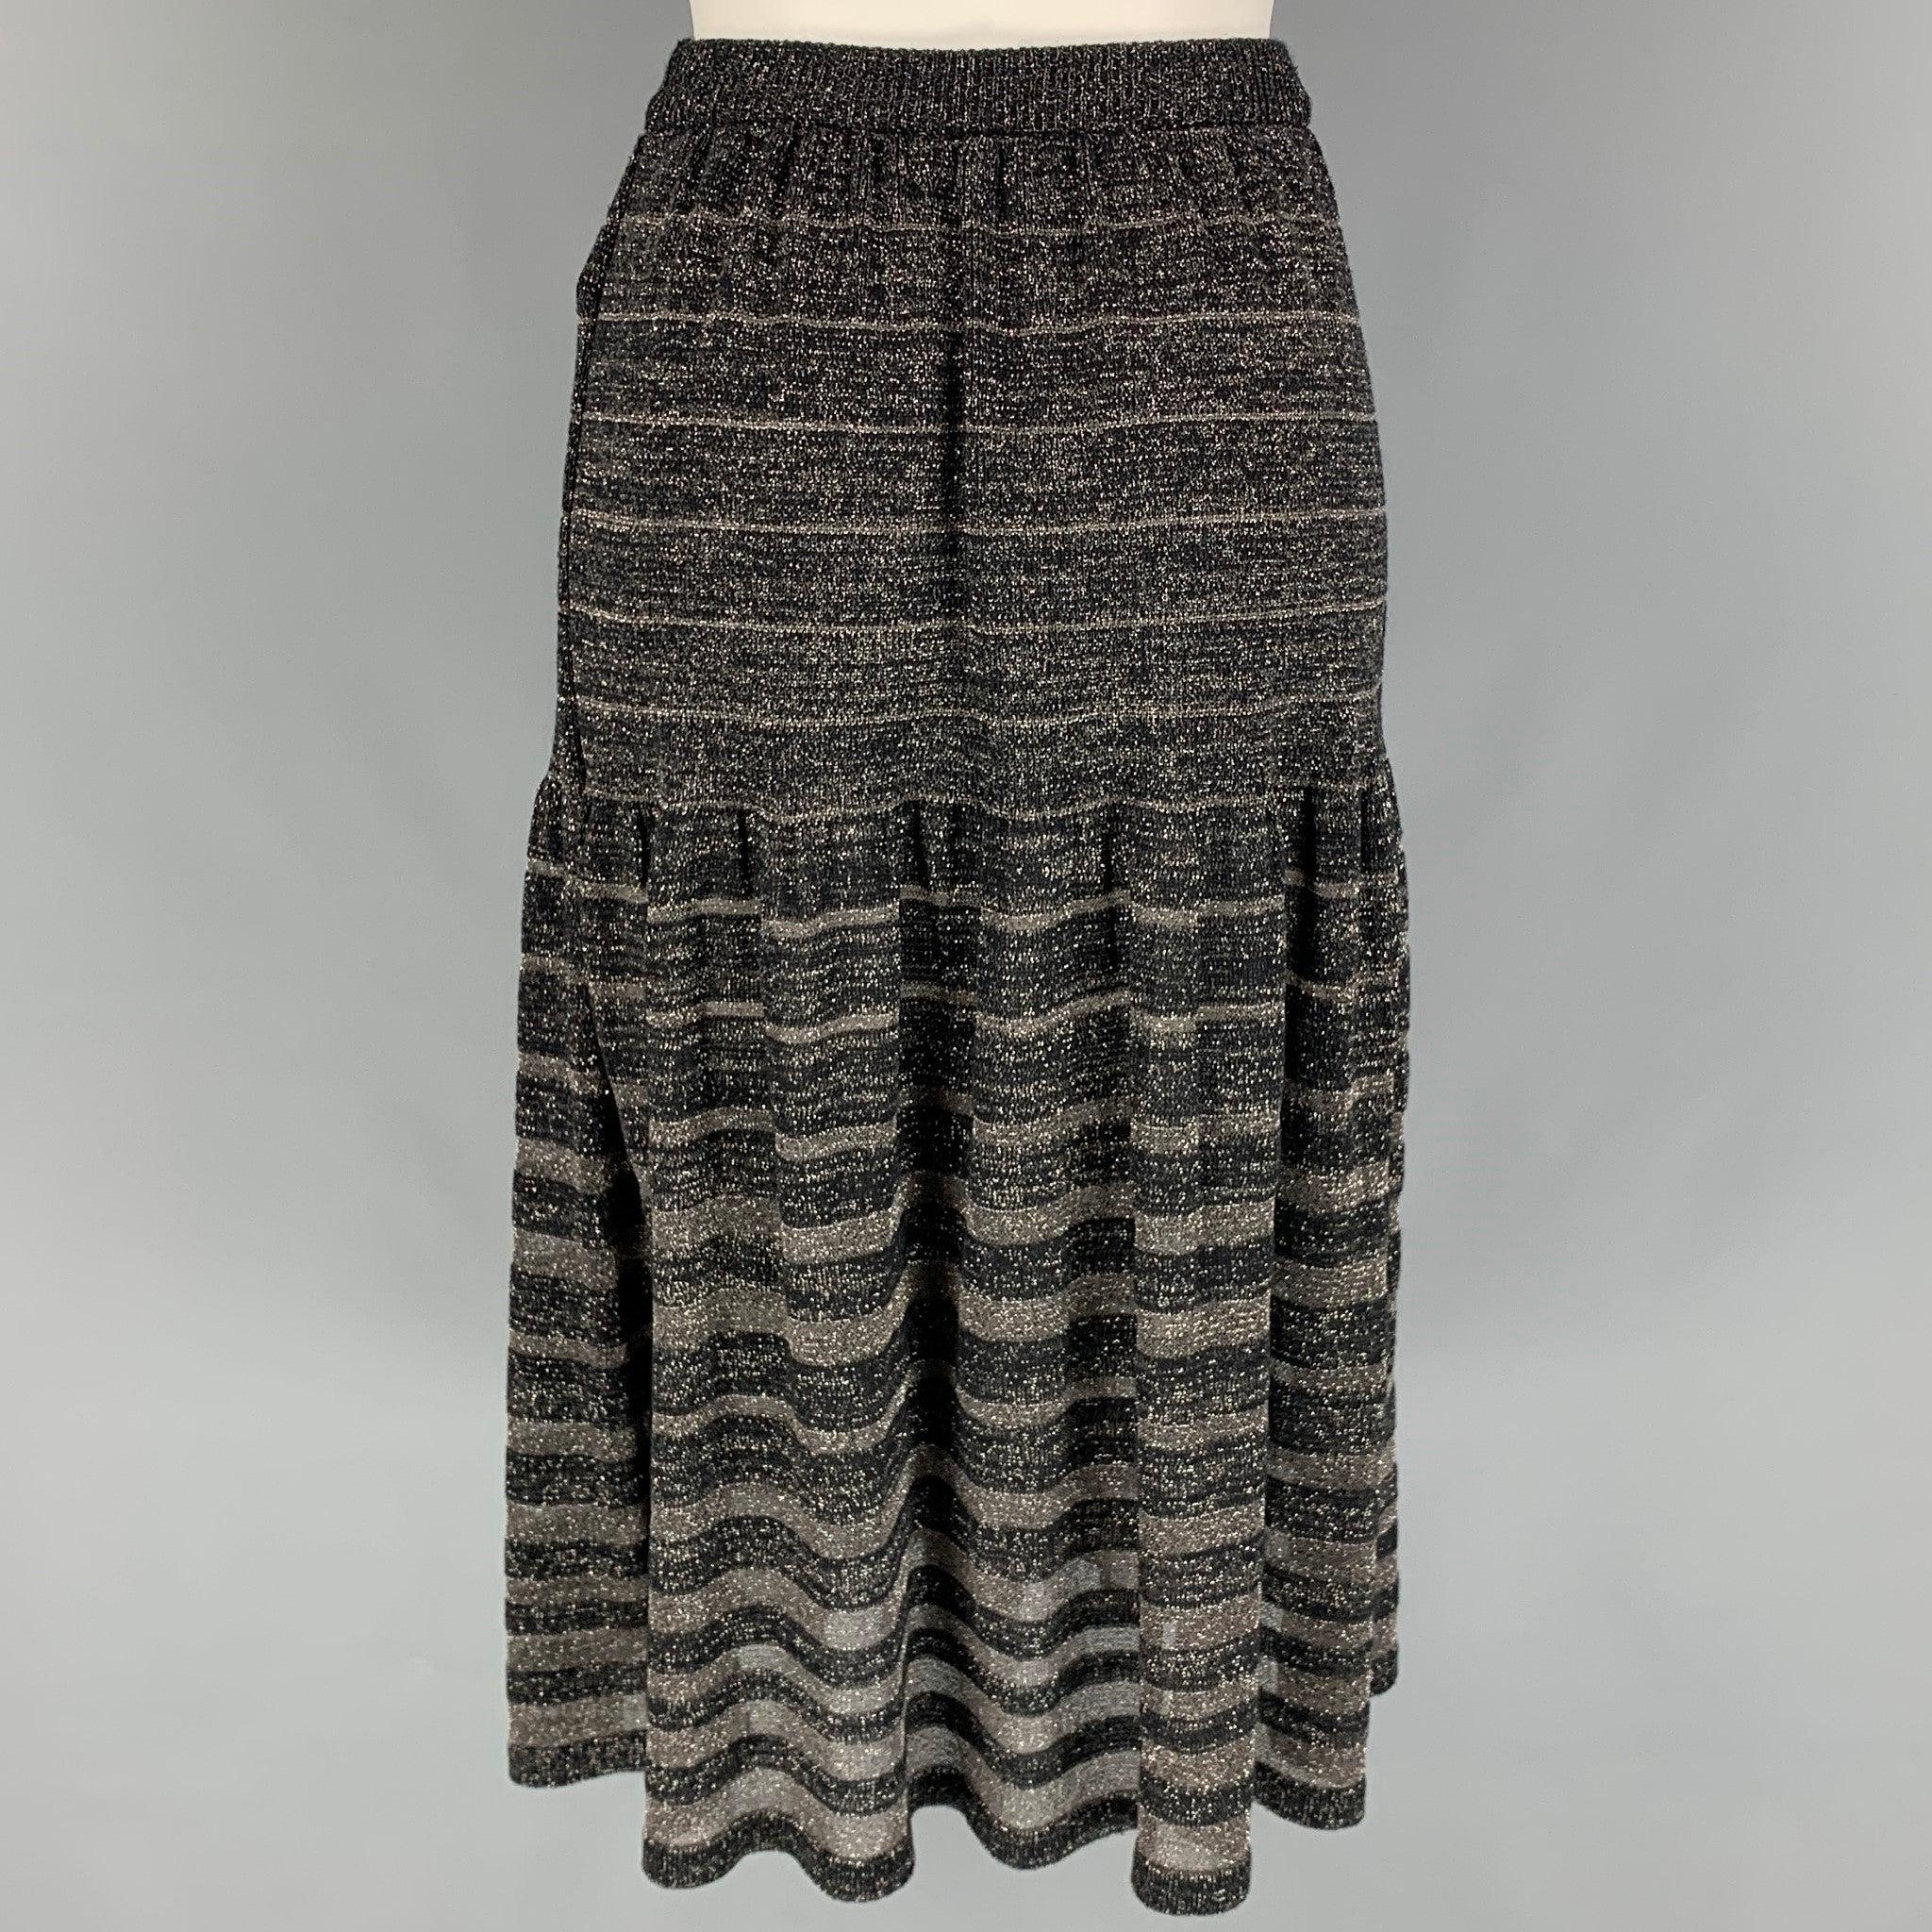 KENZO Size S Black Acrylic Blend Stripe Elastic Waistband Mid-Calf Skirt In Good Condition For Sale In San Francisco, CA